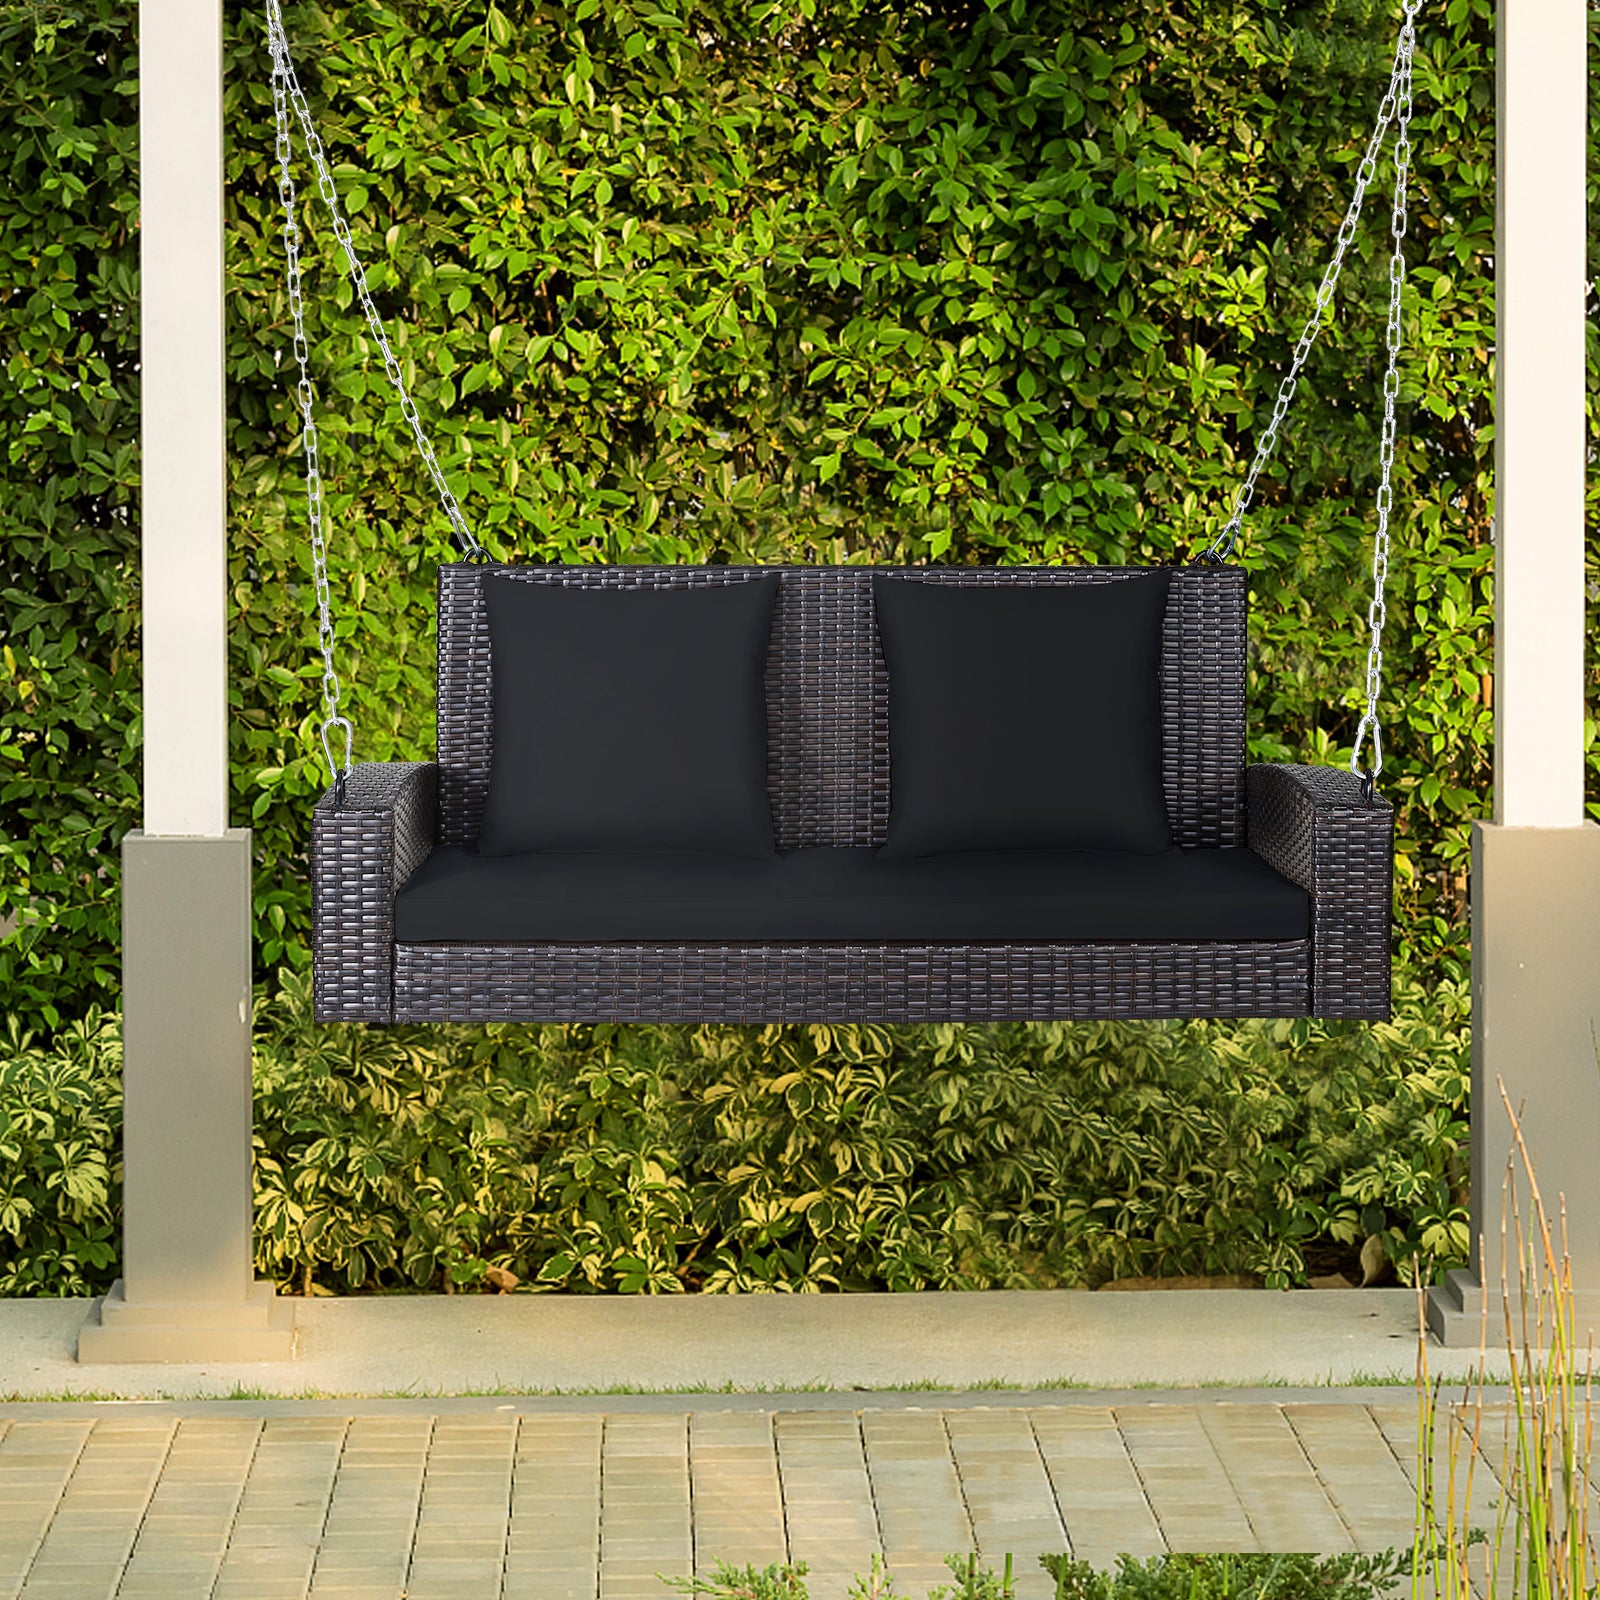 2-Seat Patio Rattan Porch Swing with Two Solid Steel Chains-Black